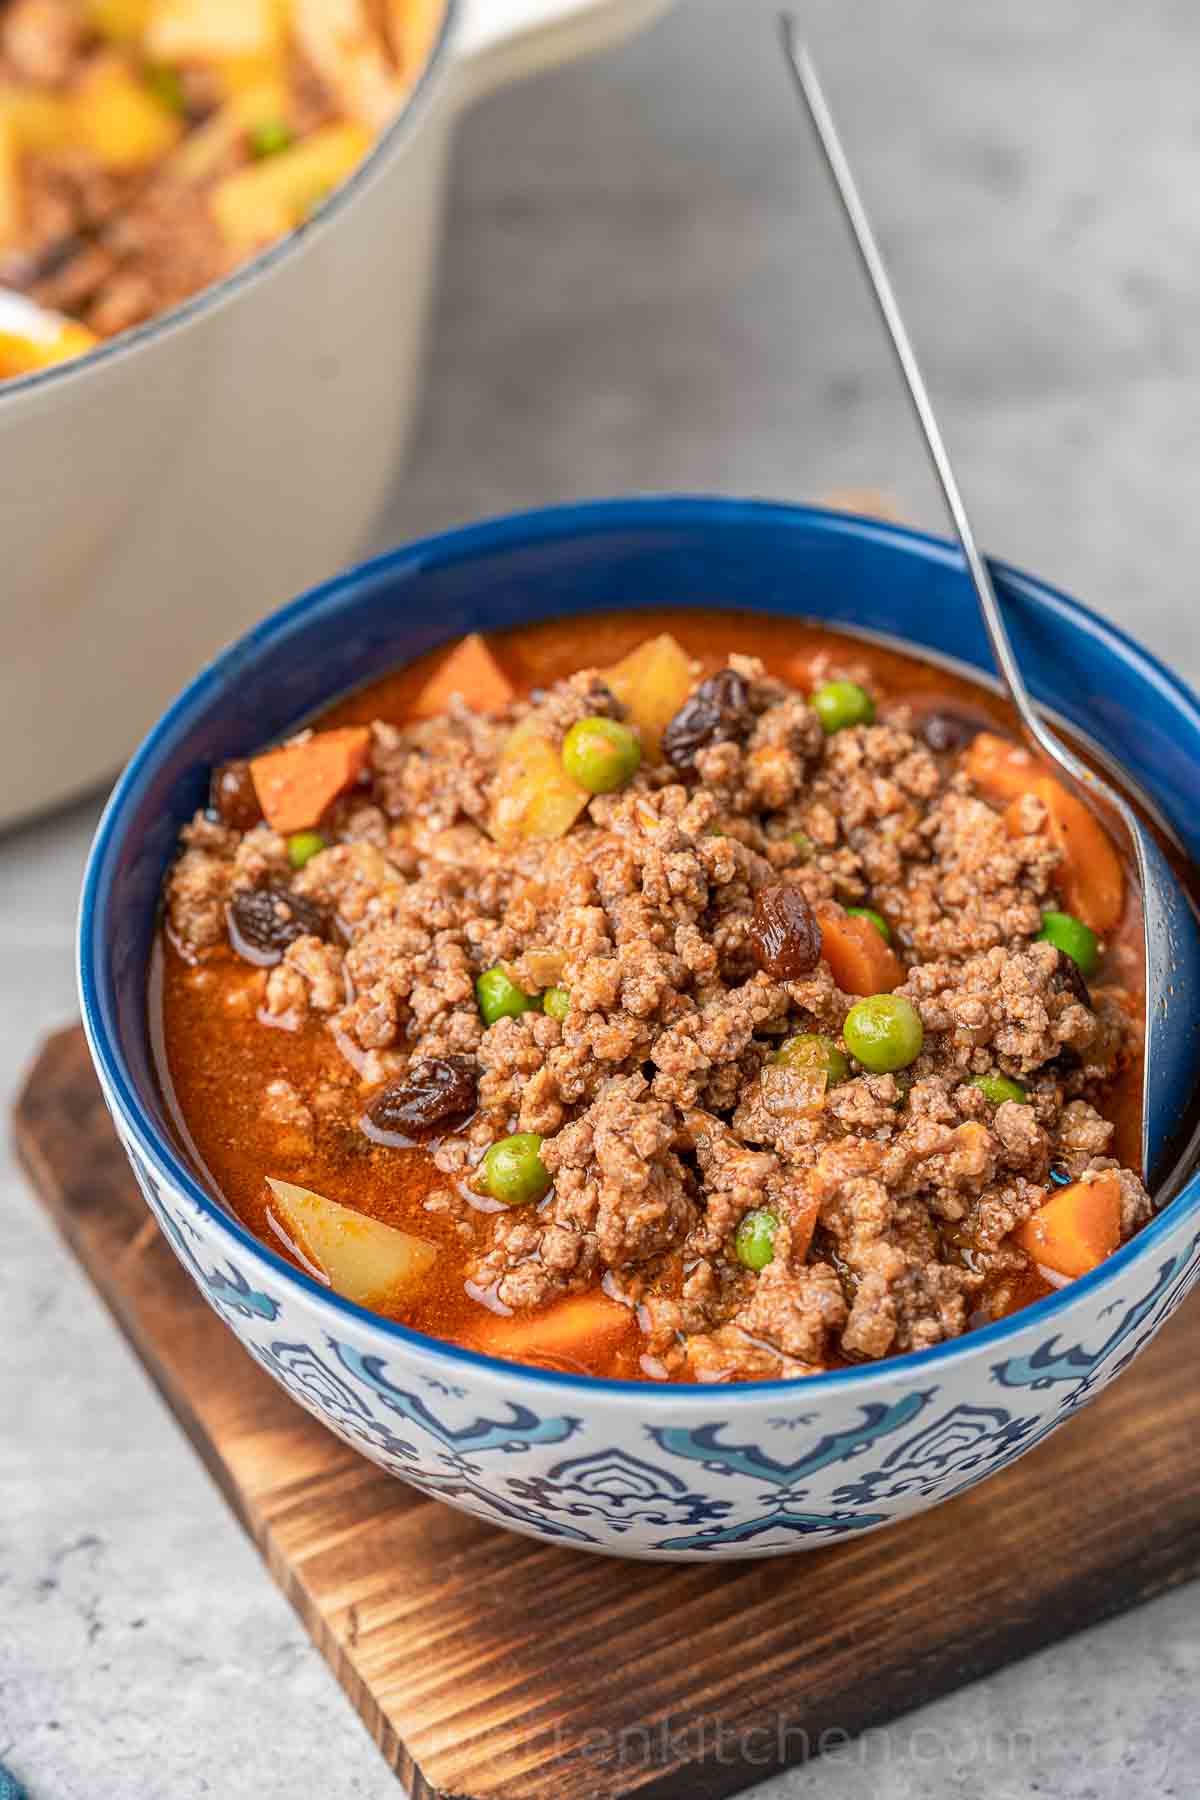 Filipino Picadillo made of ground pork and beef with vegetables. This is called giniling in Filipino.